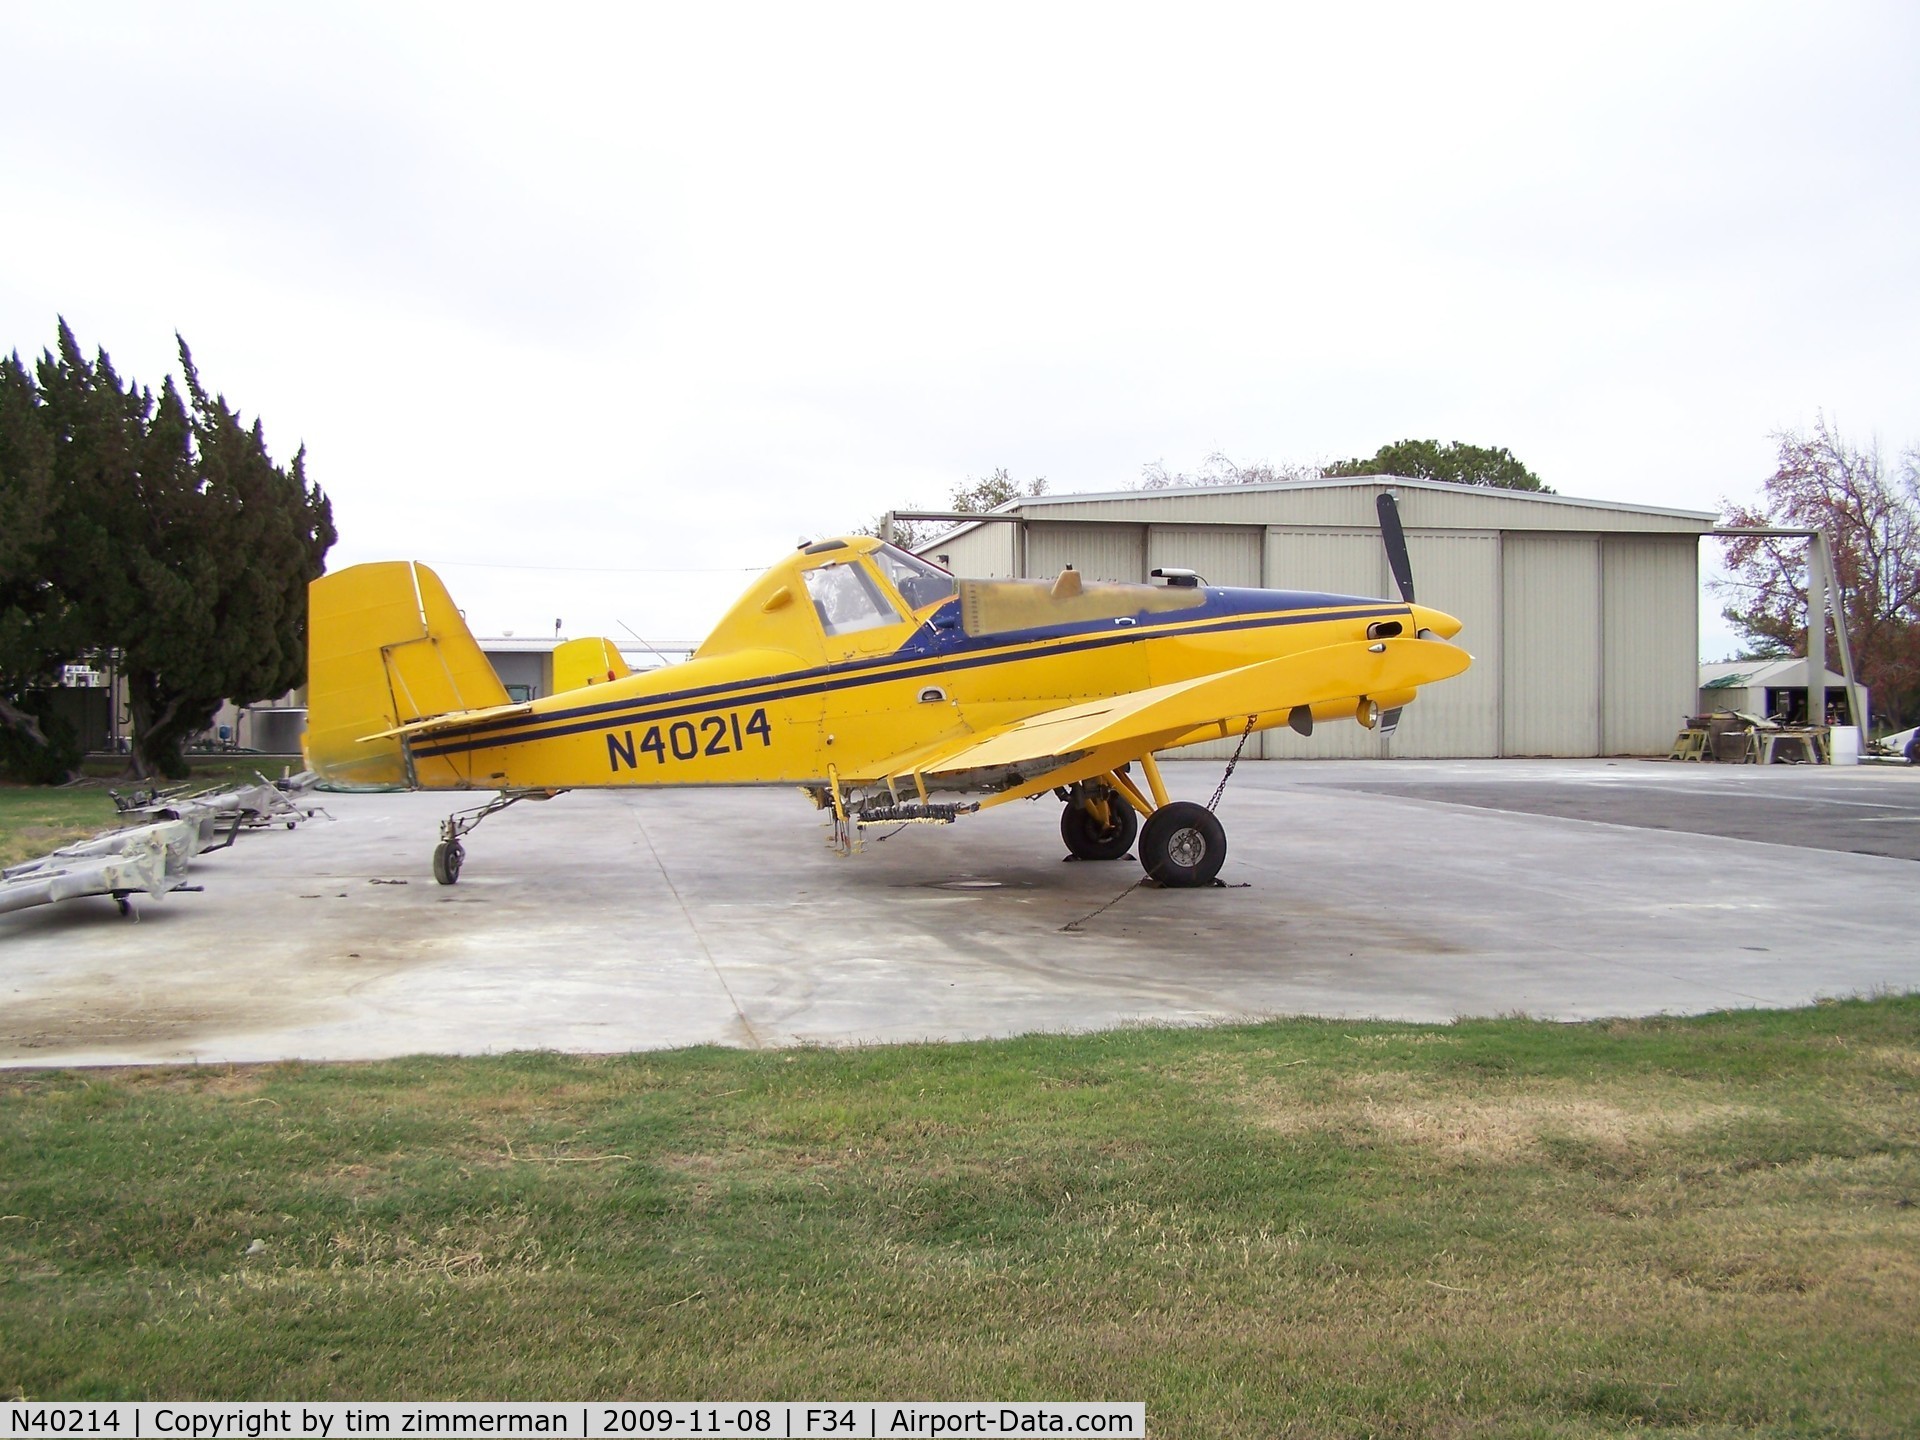 N40214, 1980 Ayres S2R-T34 Thrush C/N T34-032, West Valley Aviation N40214 rigged as sprayer